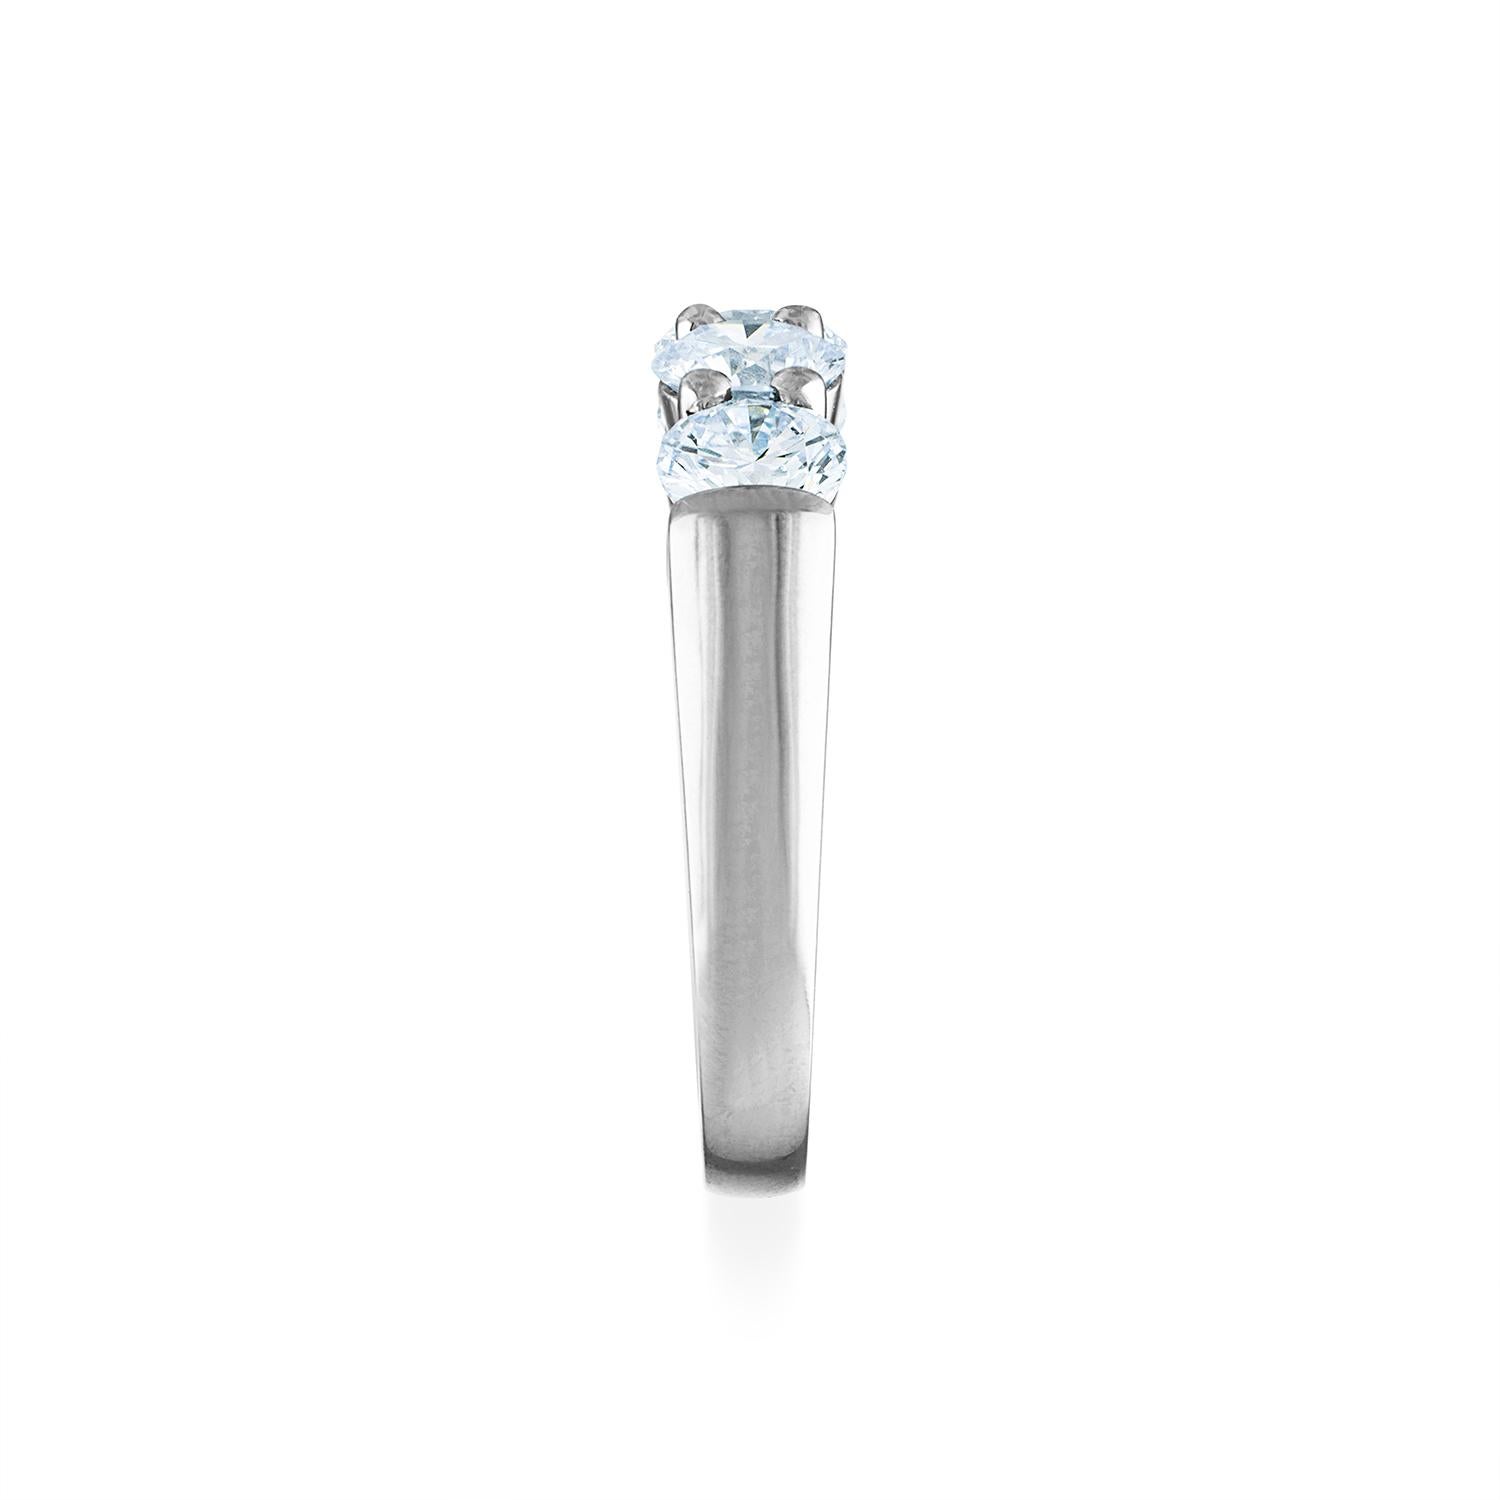 Metal: Platinum
Diamond Shape: Round Brilliant
Total Diamond Weight: 2.00 CTW
Number of Diamonds: 5
Size: 7
Clarity: Very Slightly Included ( VS2 )
Color: Near Colorless ( I )